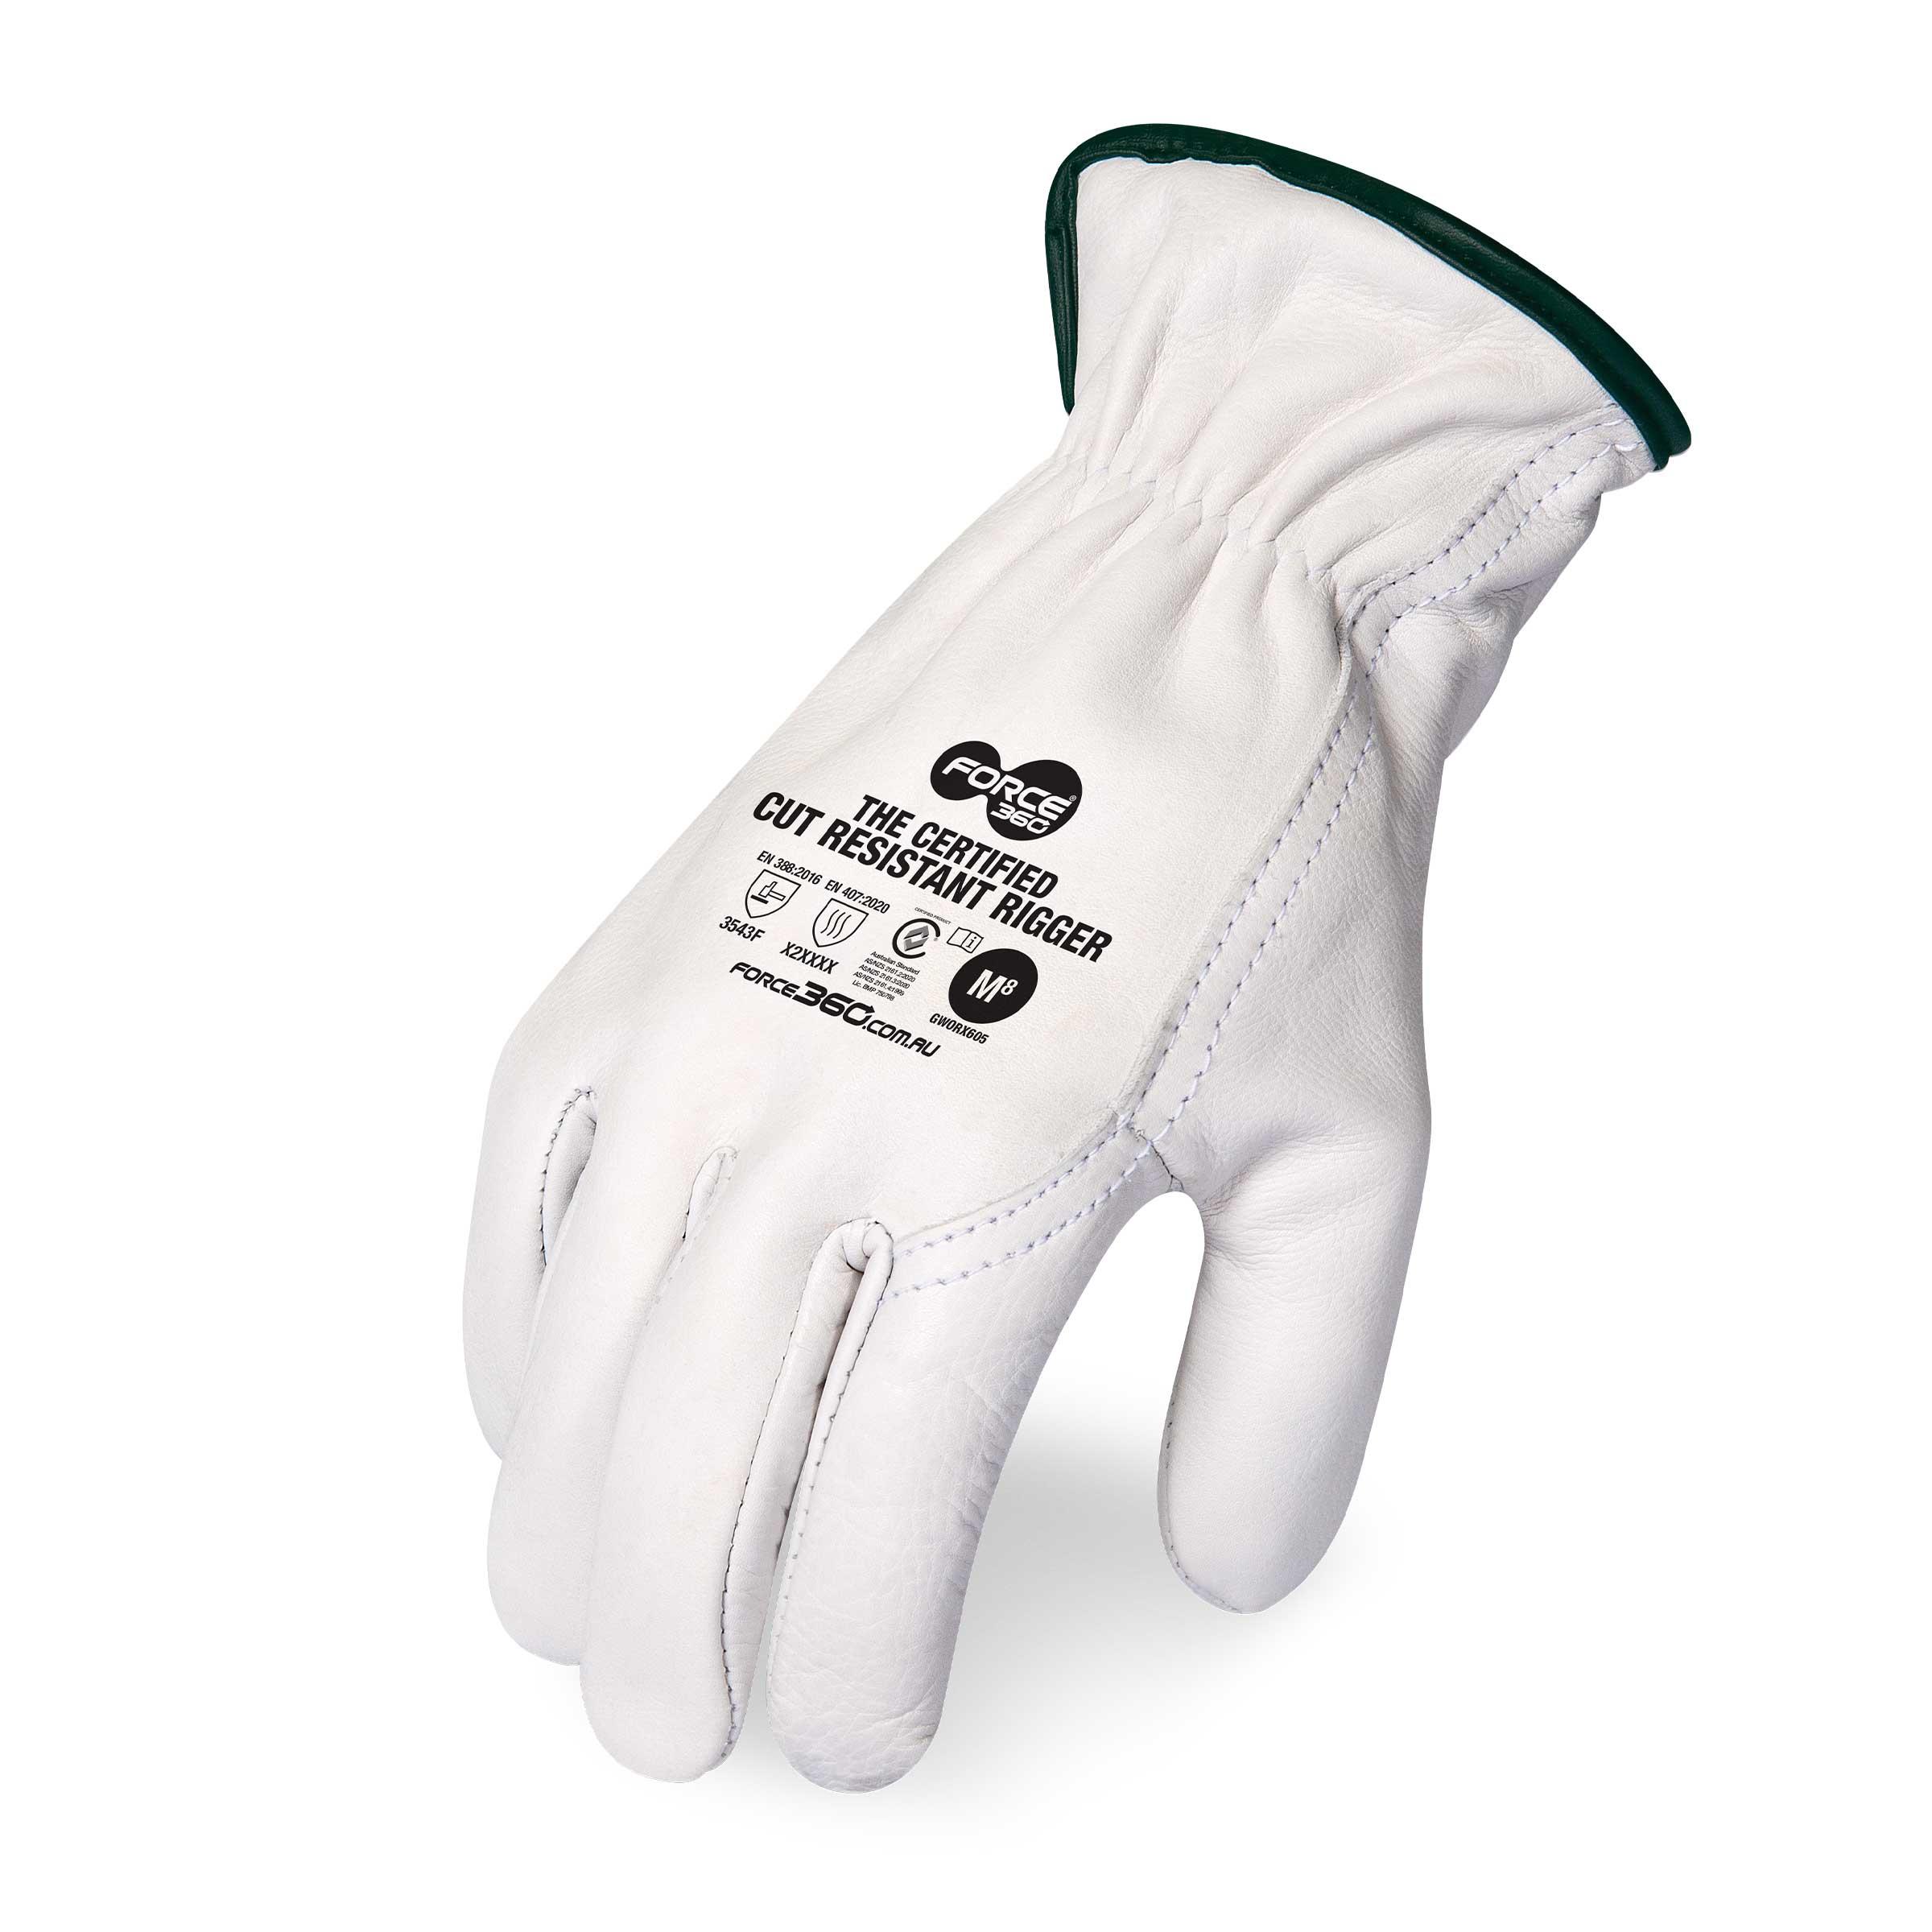 F360 GWORX605 The Certified Cut Resistant Rigger Glove